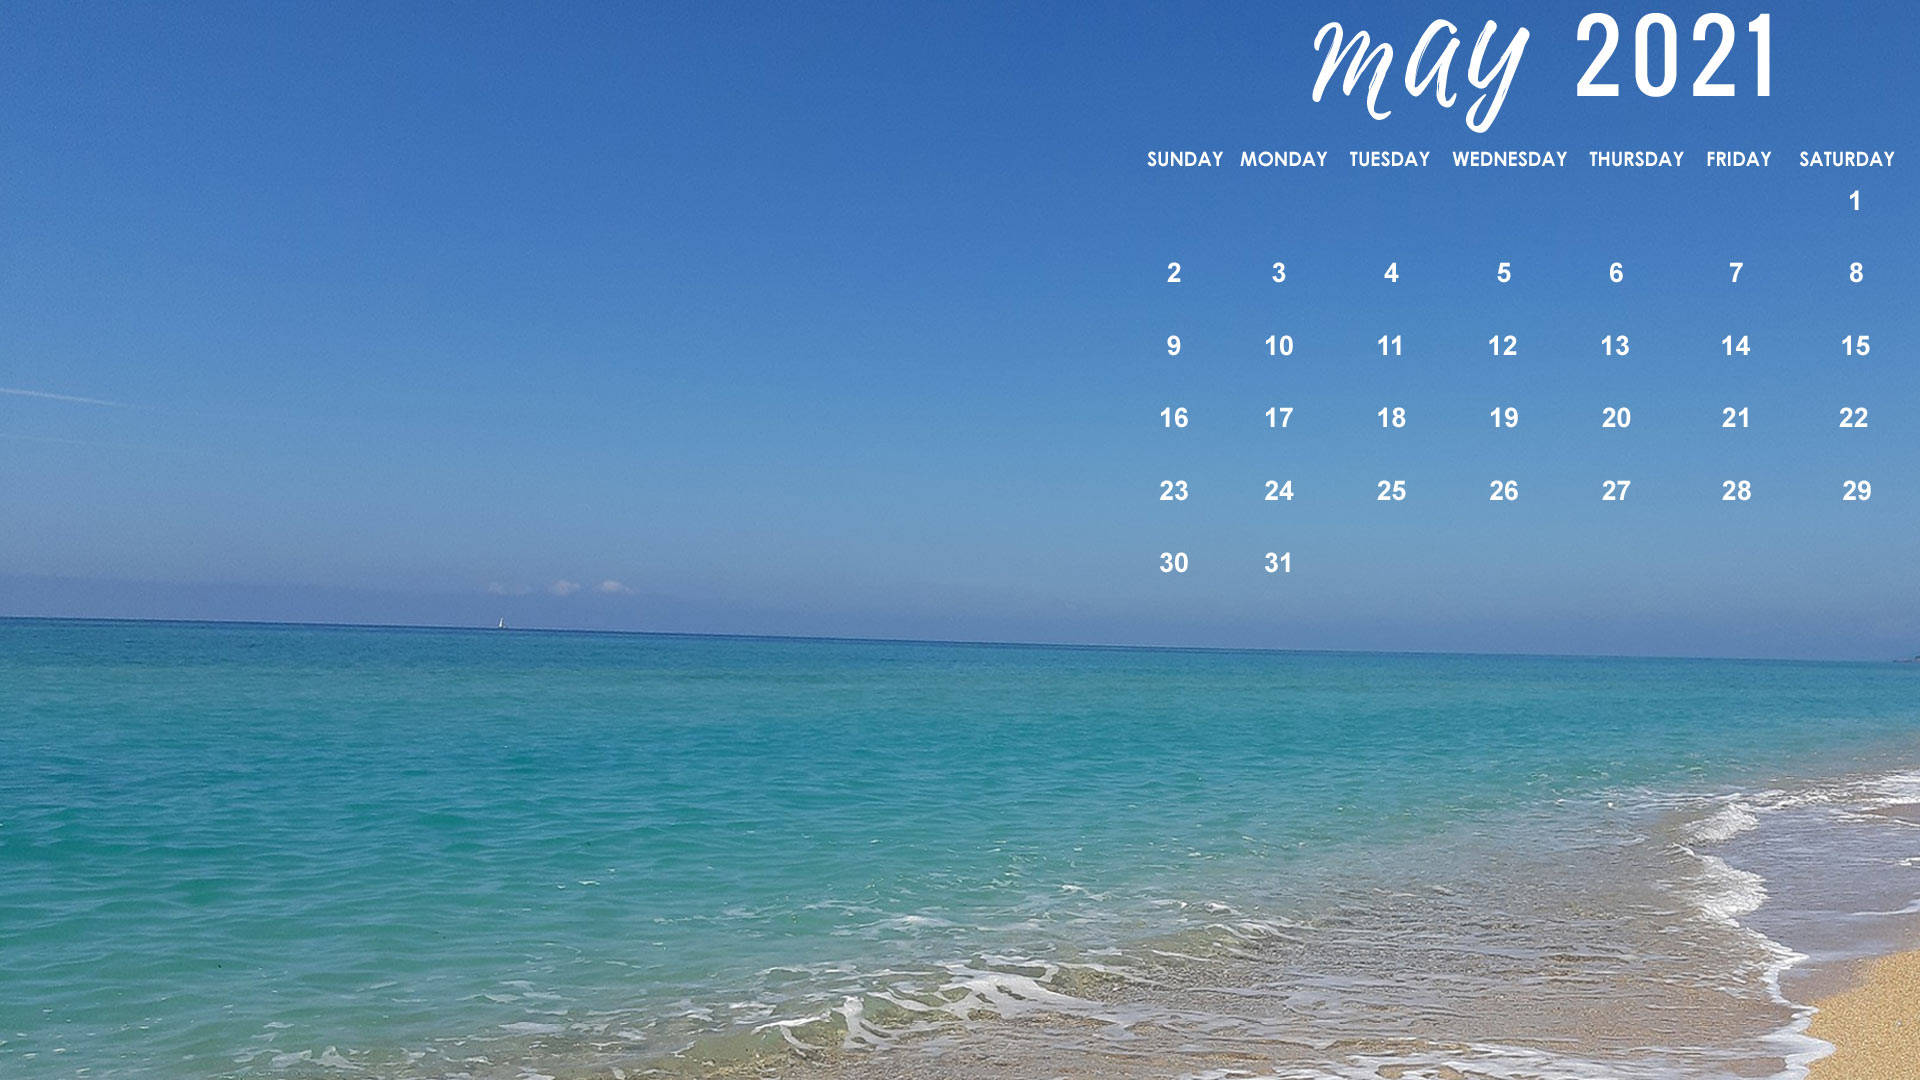 Enjoy The Last Days Of May In A Beautiful Tropical Beach. Background